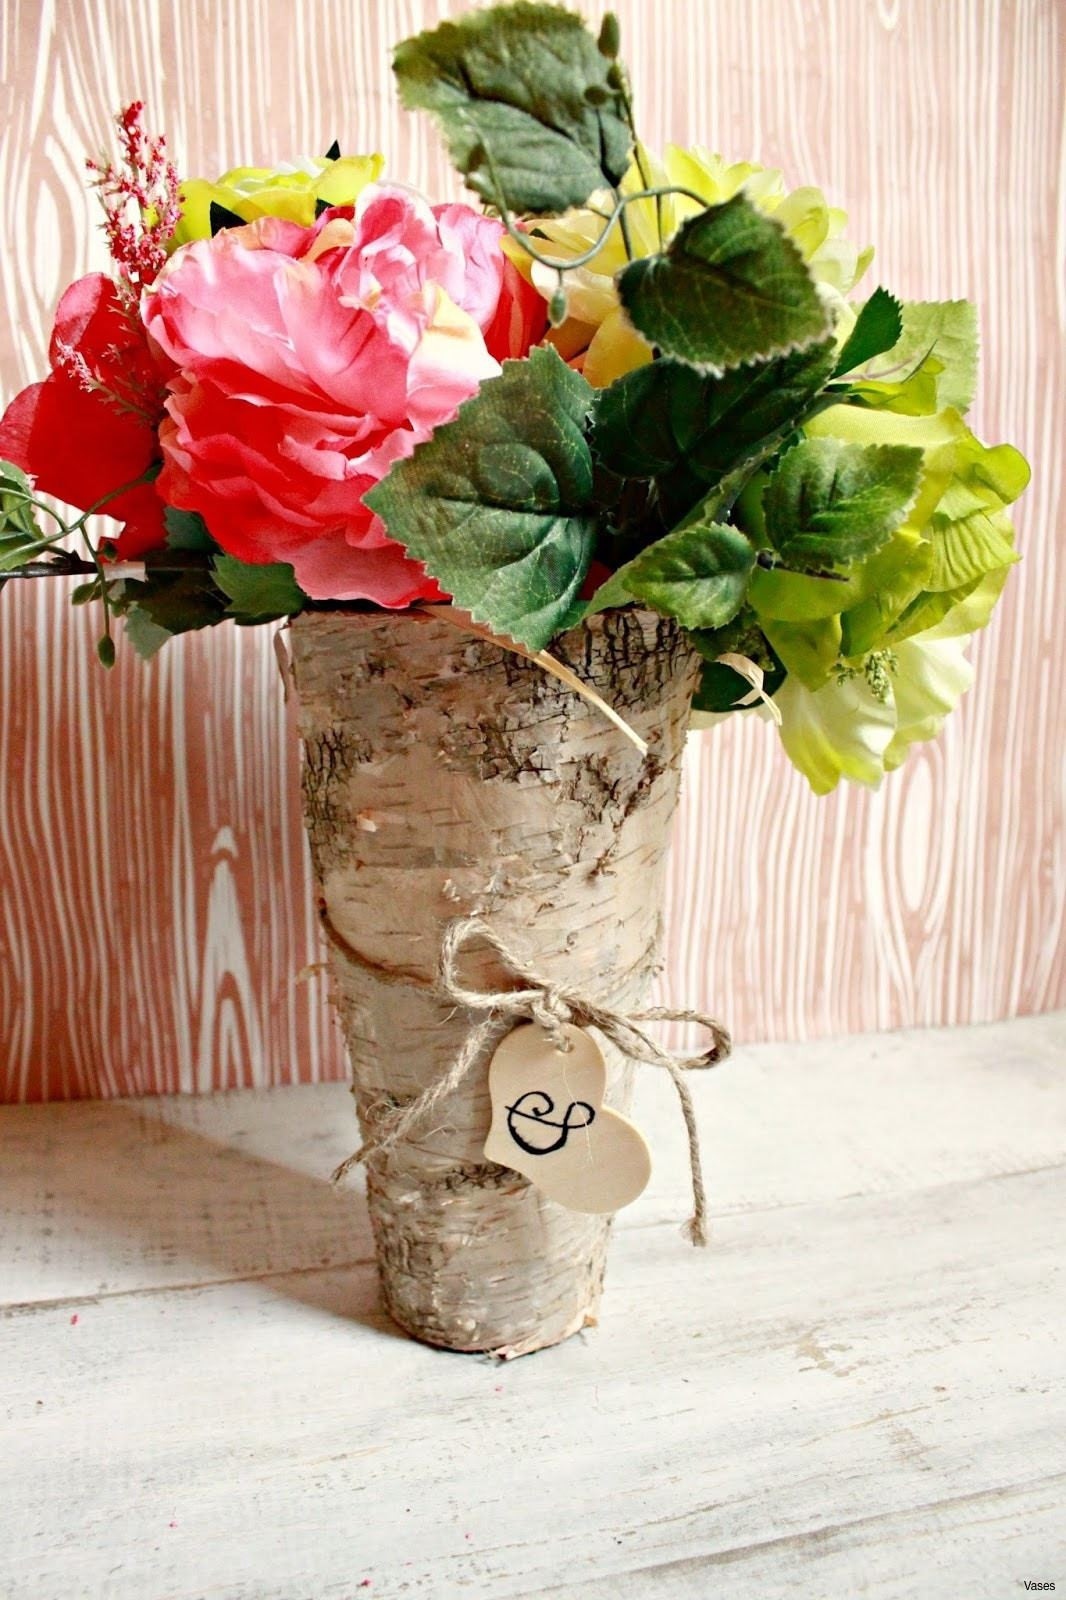 25 Awesome Vase with Holes 2022 free download vase with holes of fresh flowers for wedding h vases diy wood vase i 0d base turntable within fresh flowers for wedding h vases diy wood vase i 0d base turntable ideas of wooden halloween de